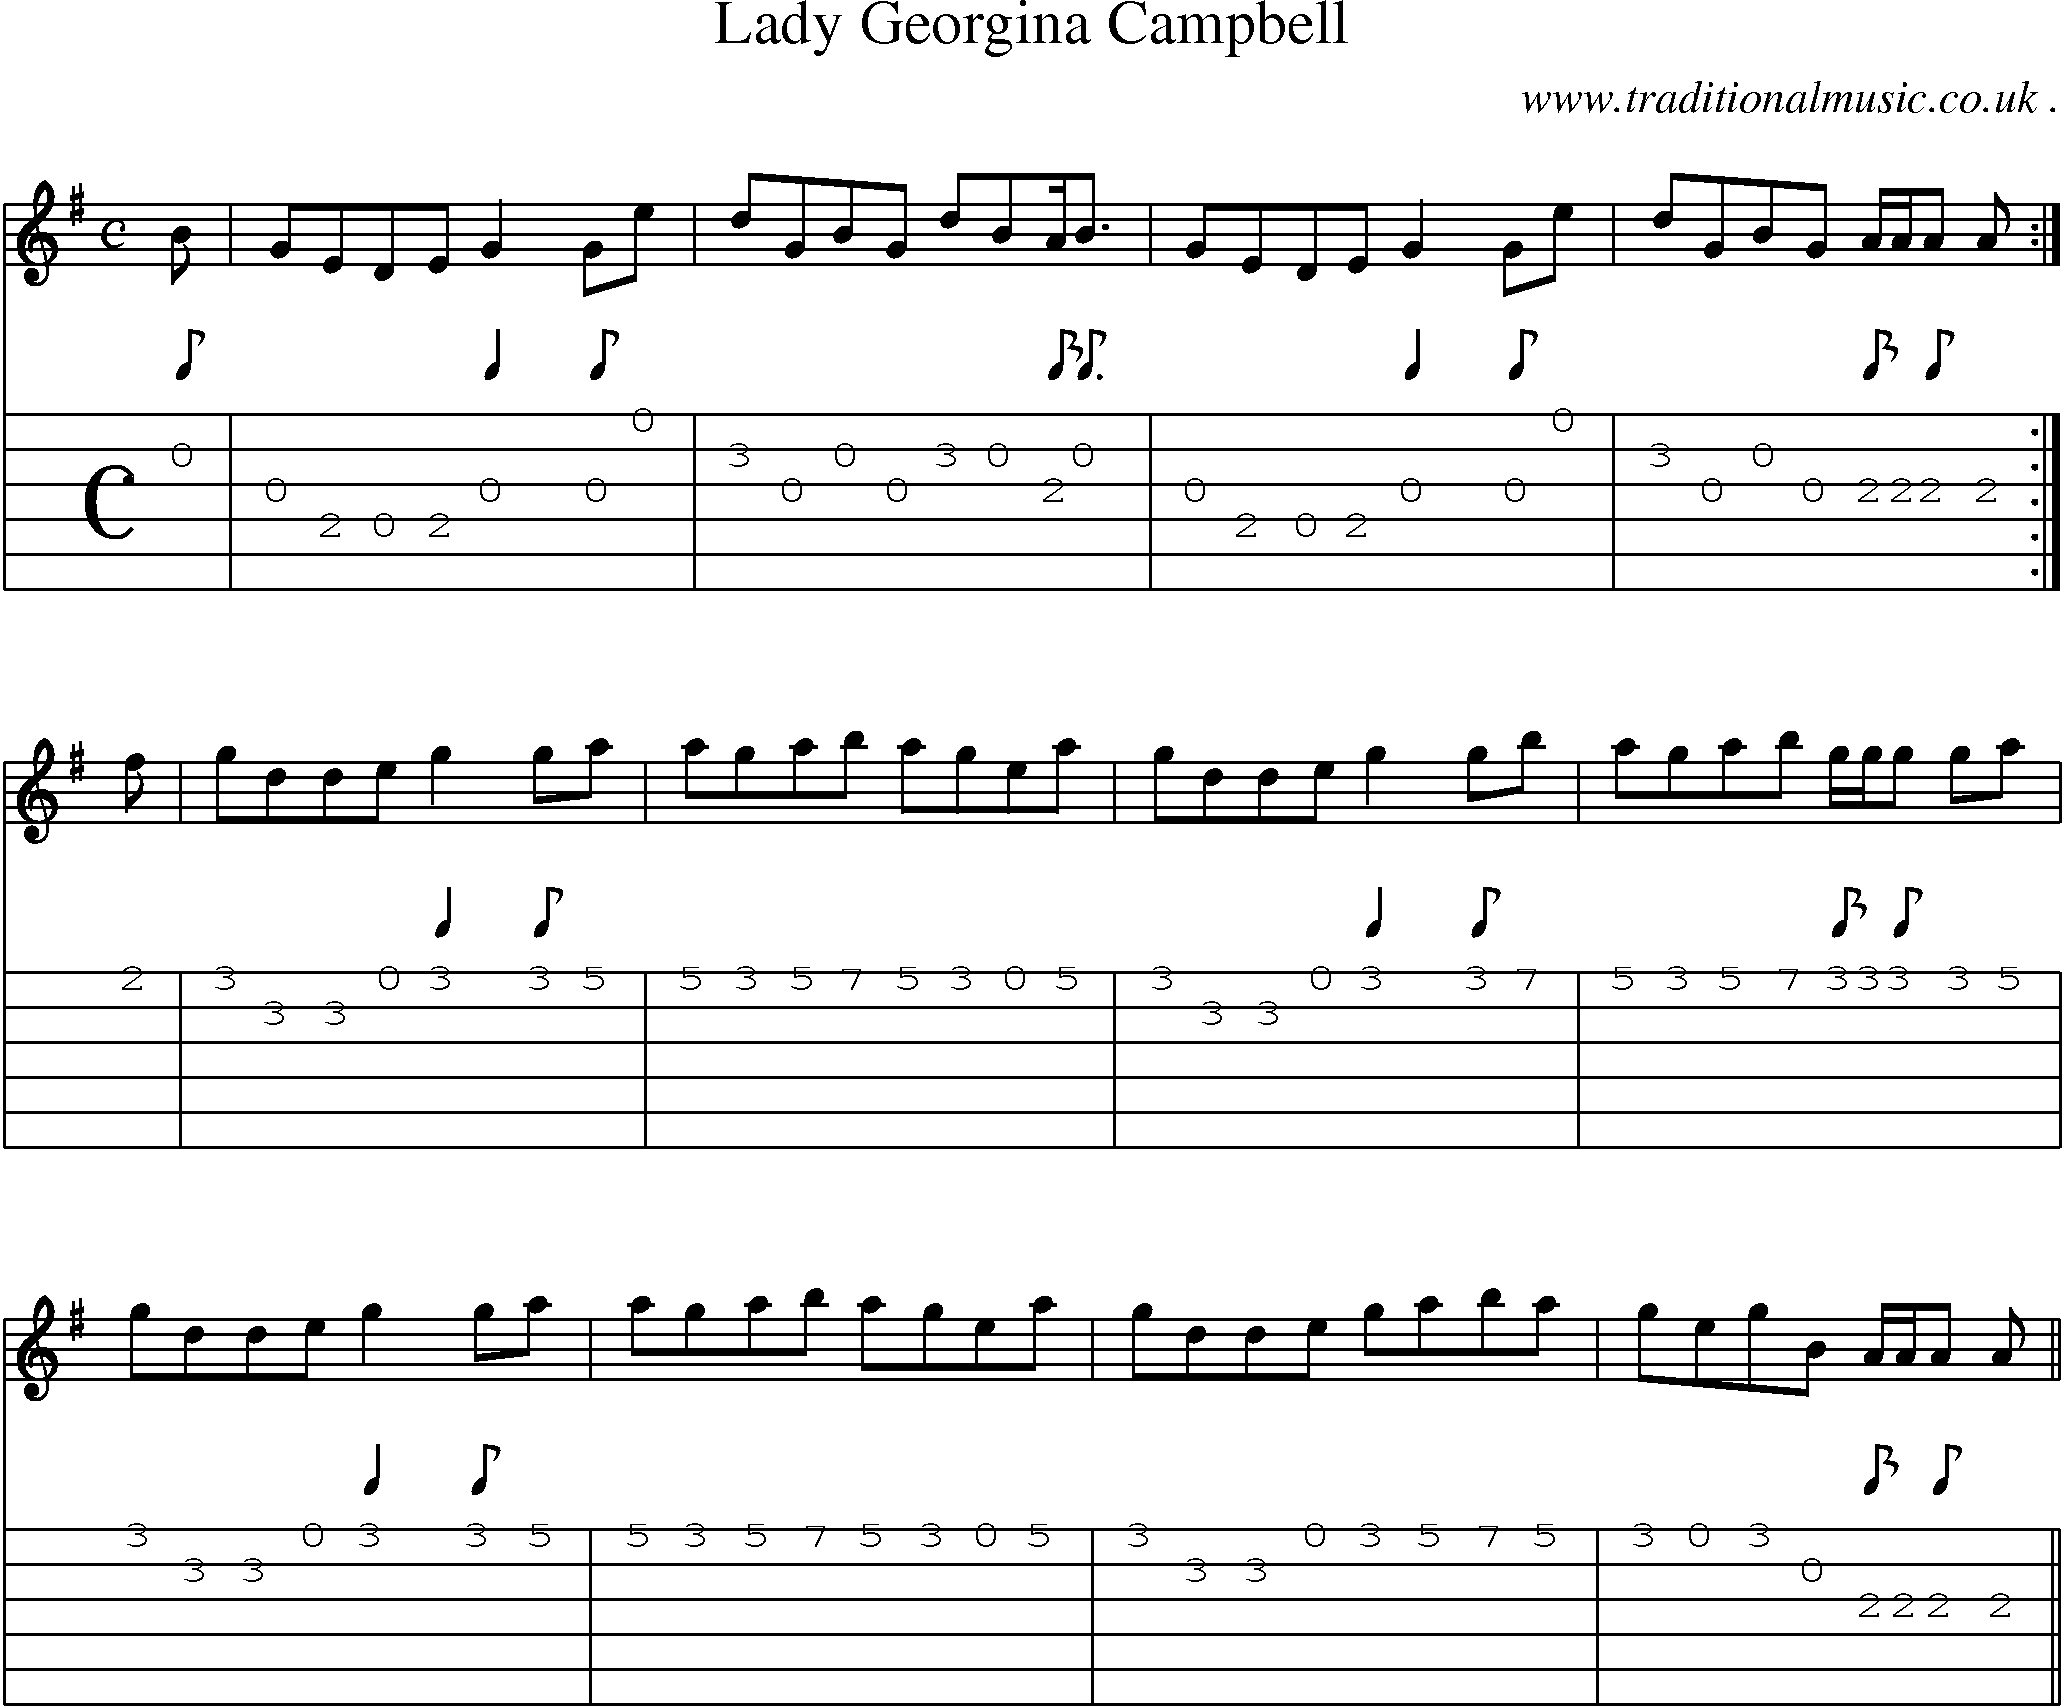 Sheet-music  score, Chords and Guitar Tabs for Lady Georgina Campbell